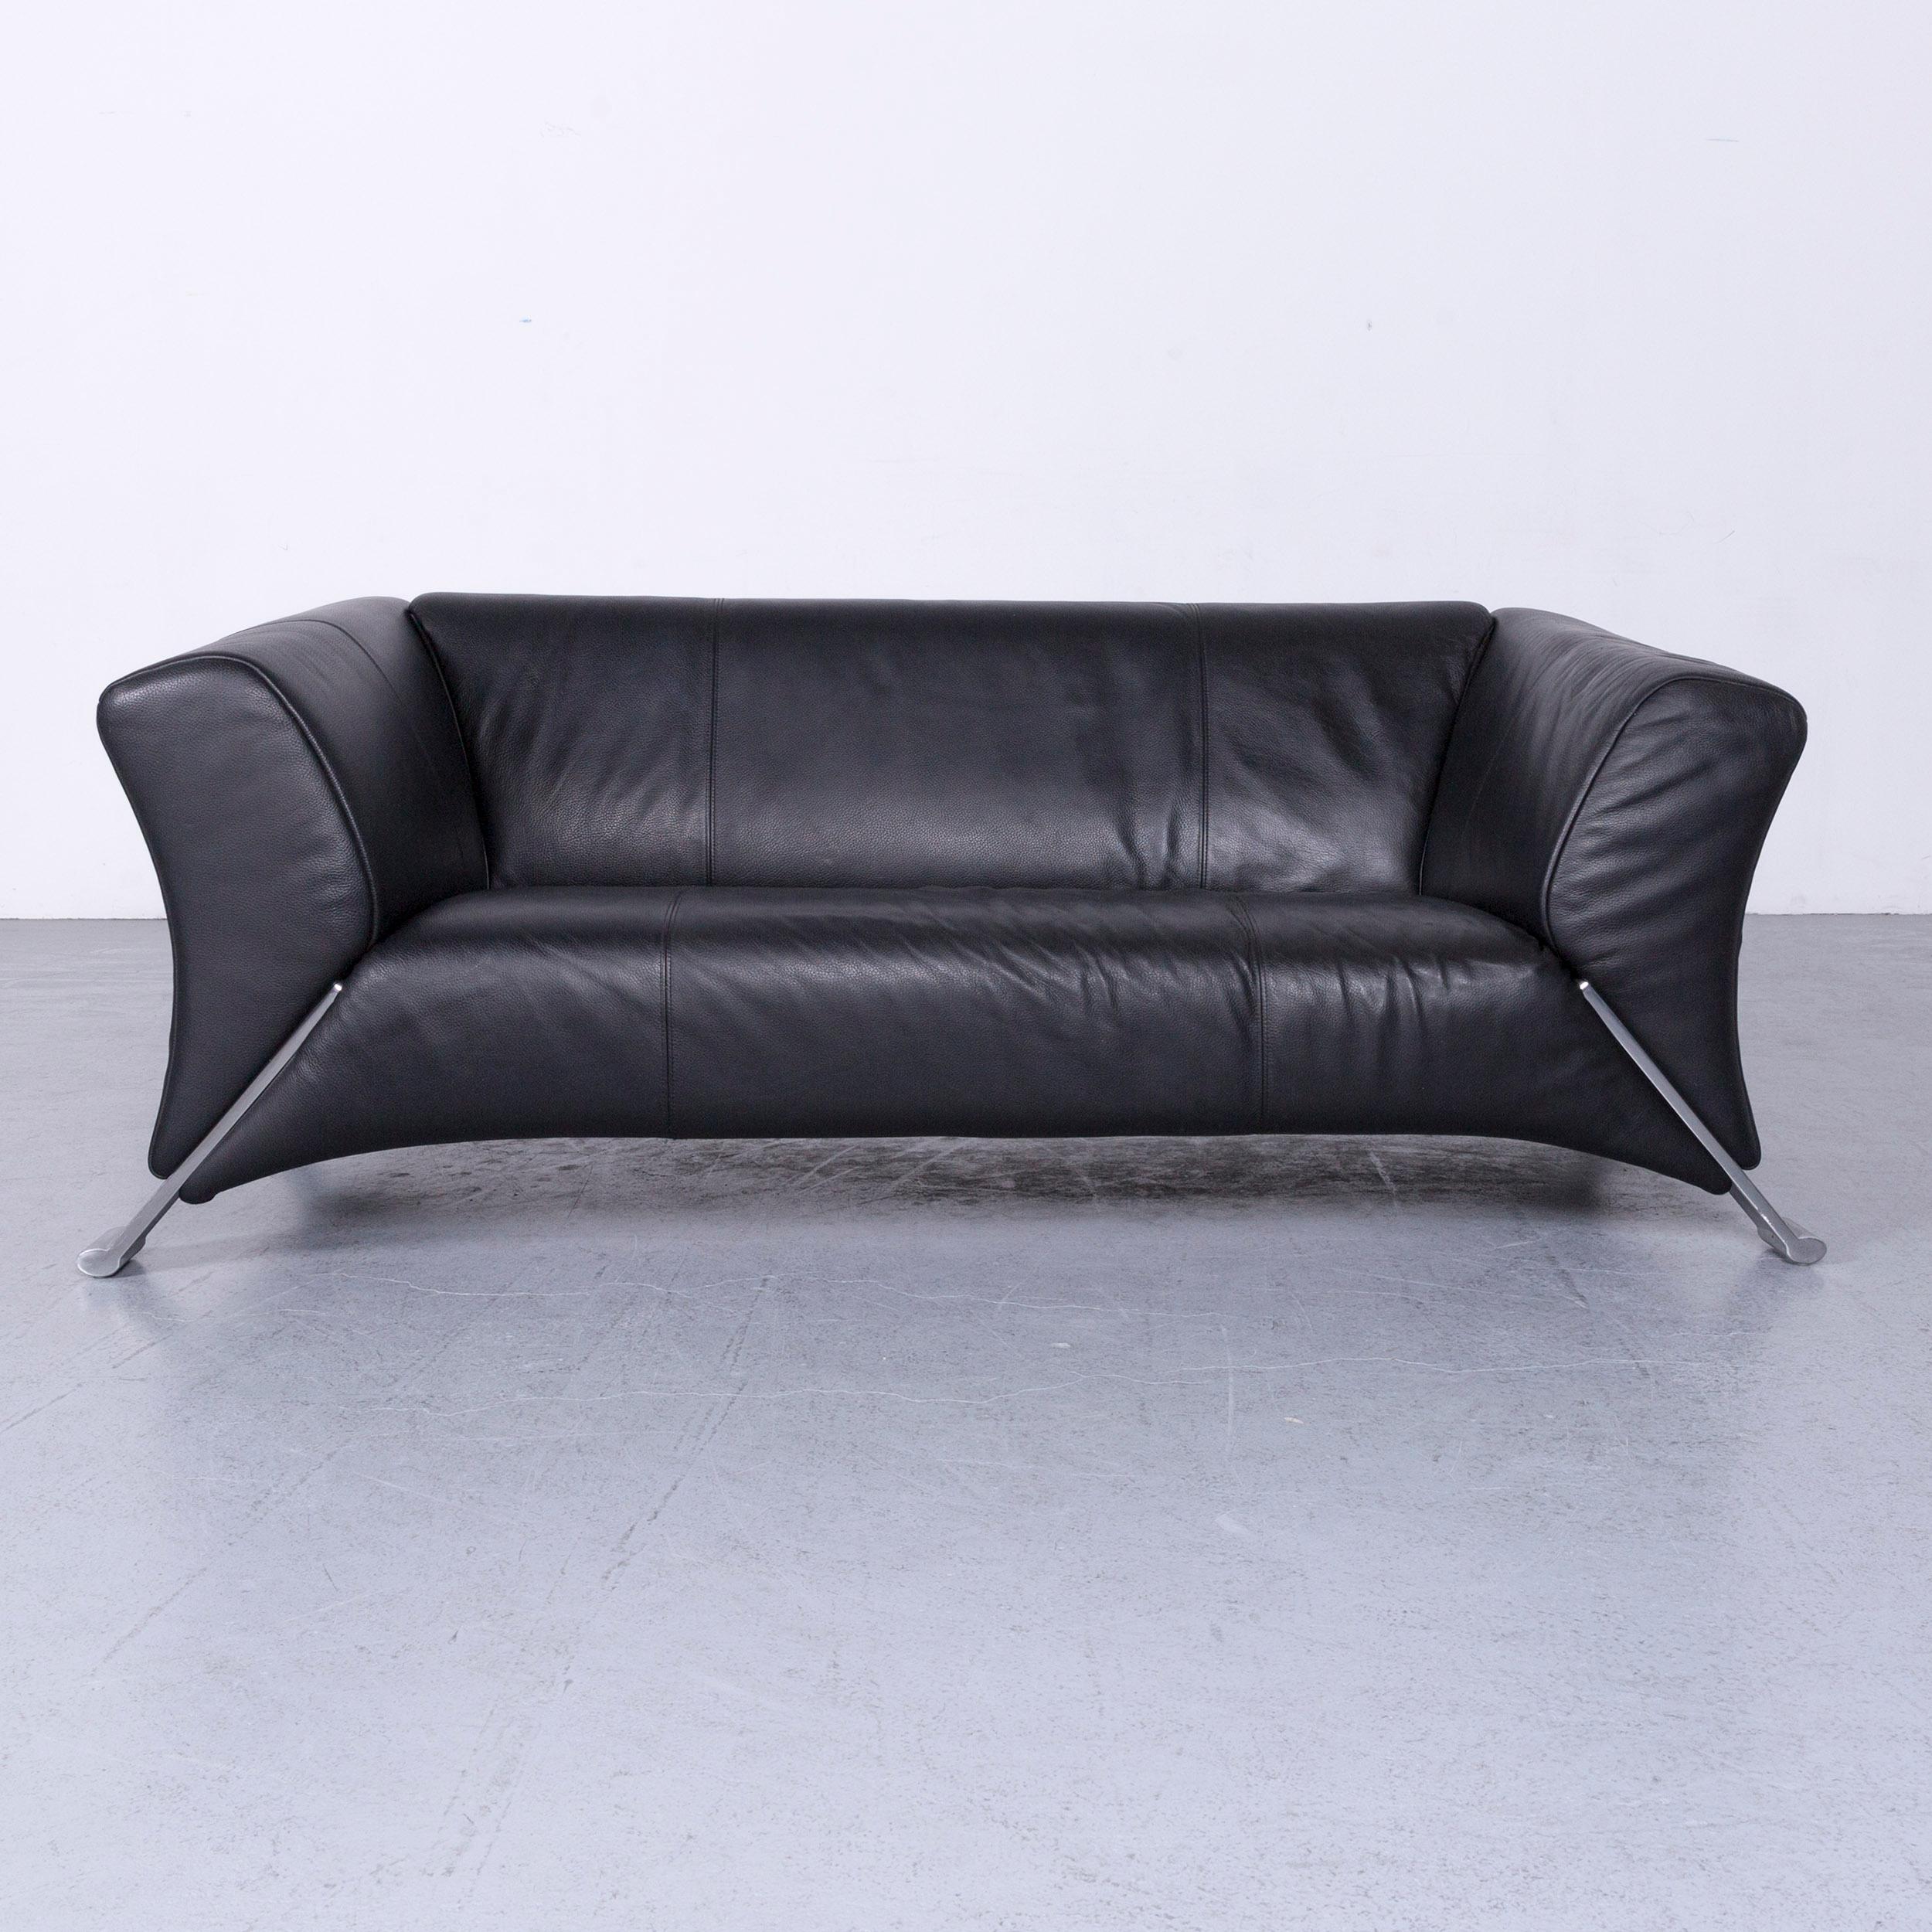 We bring to you an Rolf Benz 322 designer sofa black two-seat leather couch.